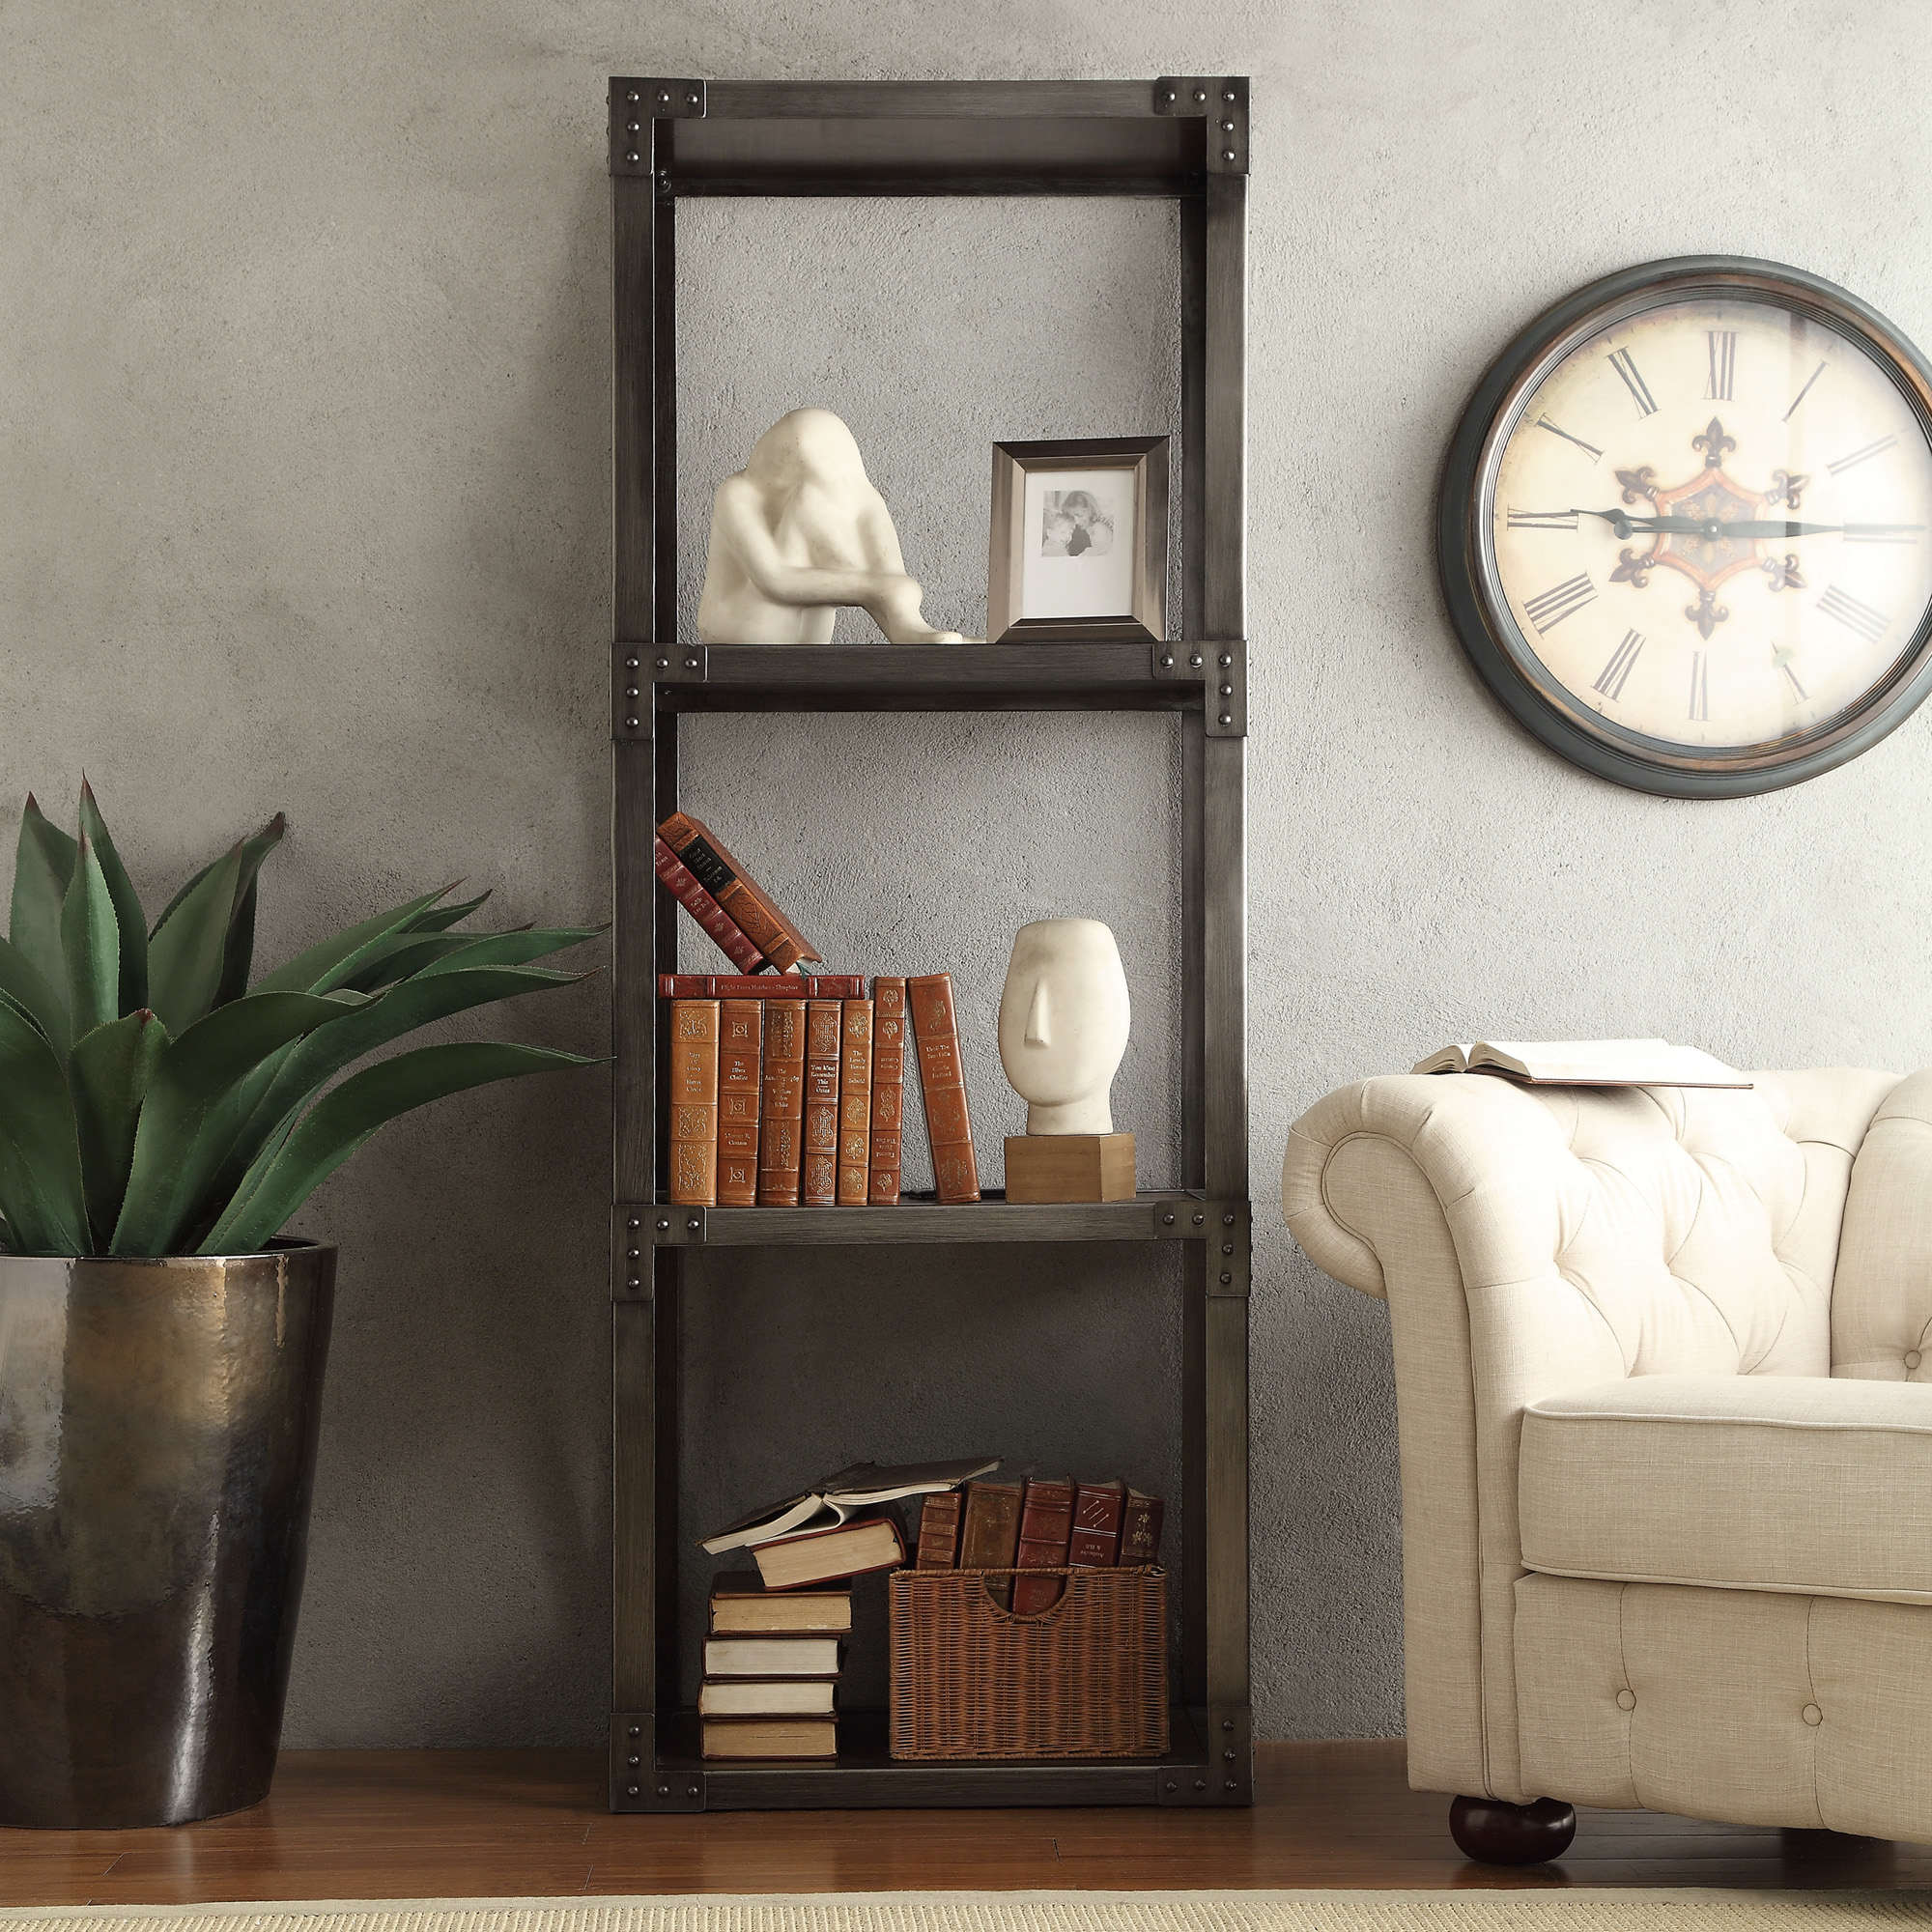 Another image that shows how to decorate a bookshelf. This is one of the all-metal, industrial-inspired bookcases. It is decorated with brown books and brown baskets. But there are also some white-colored pieces of décor that match the beige linen accent chair off to the side. 